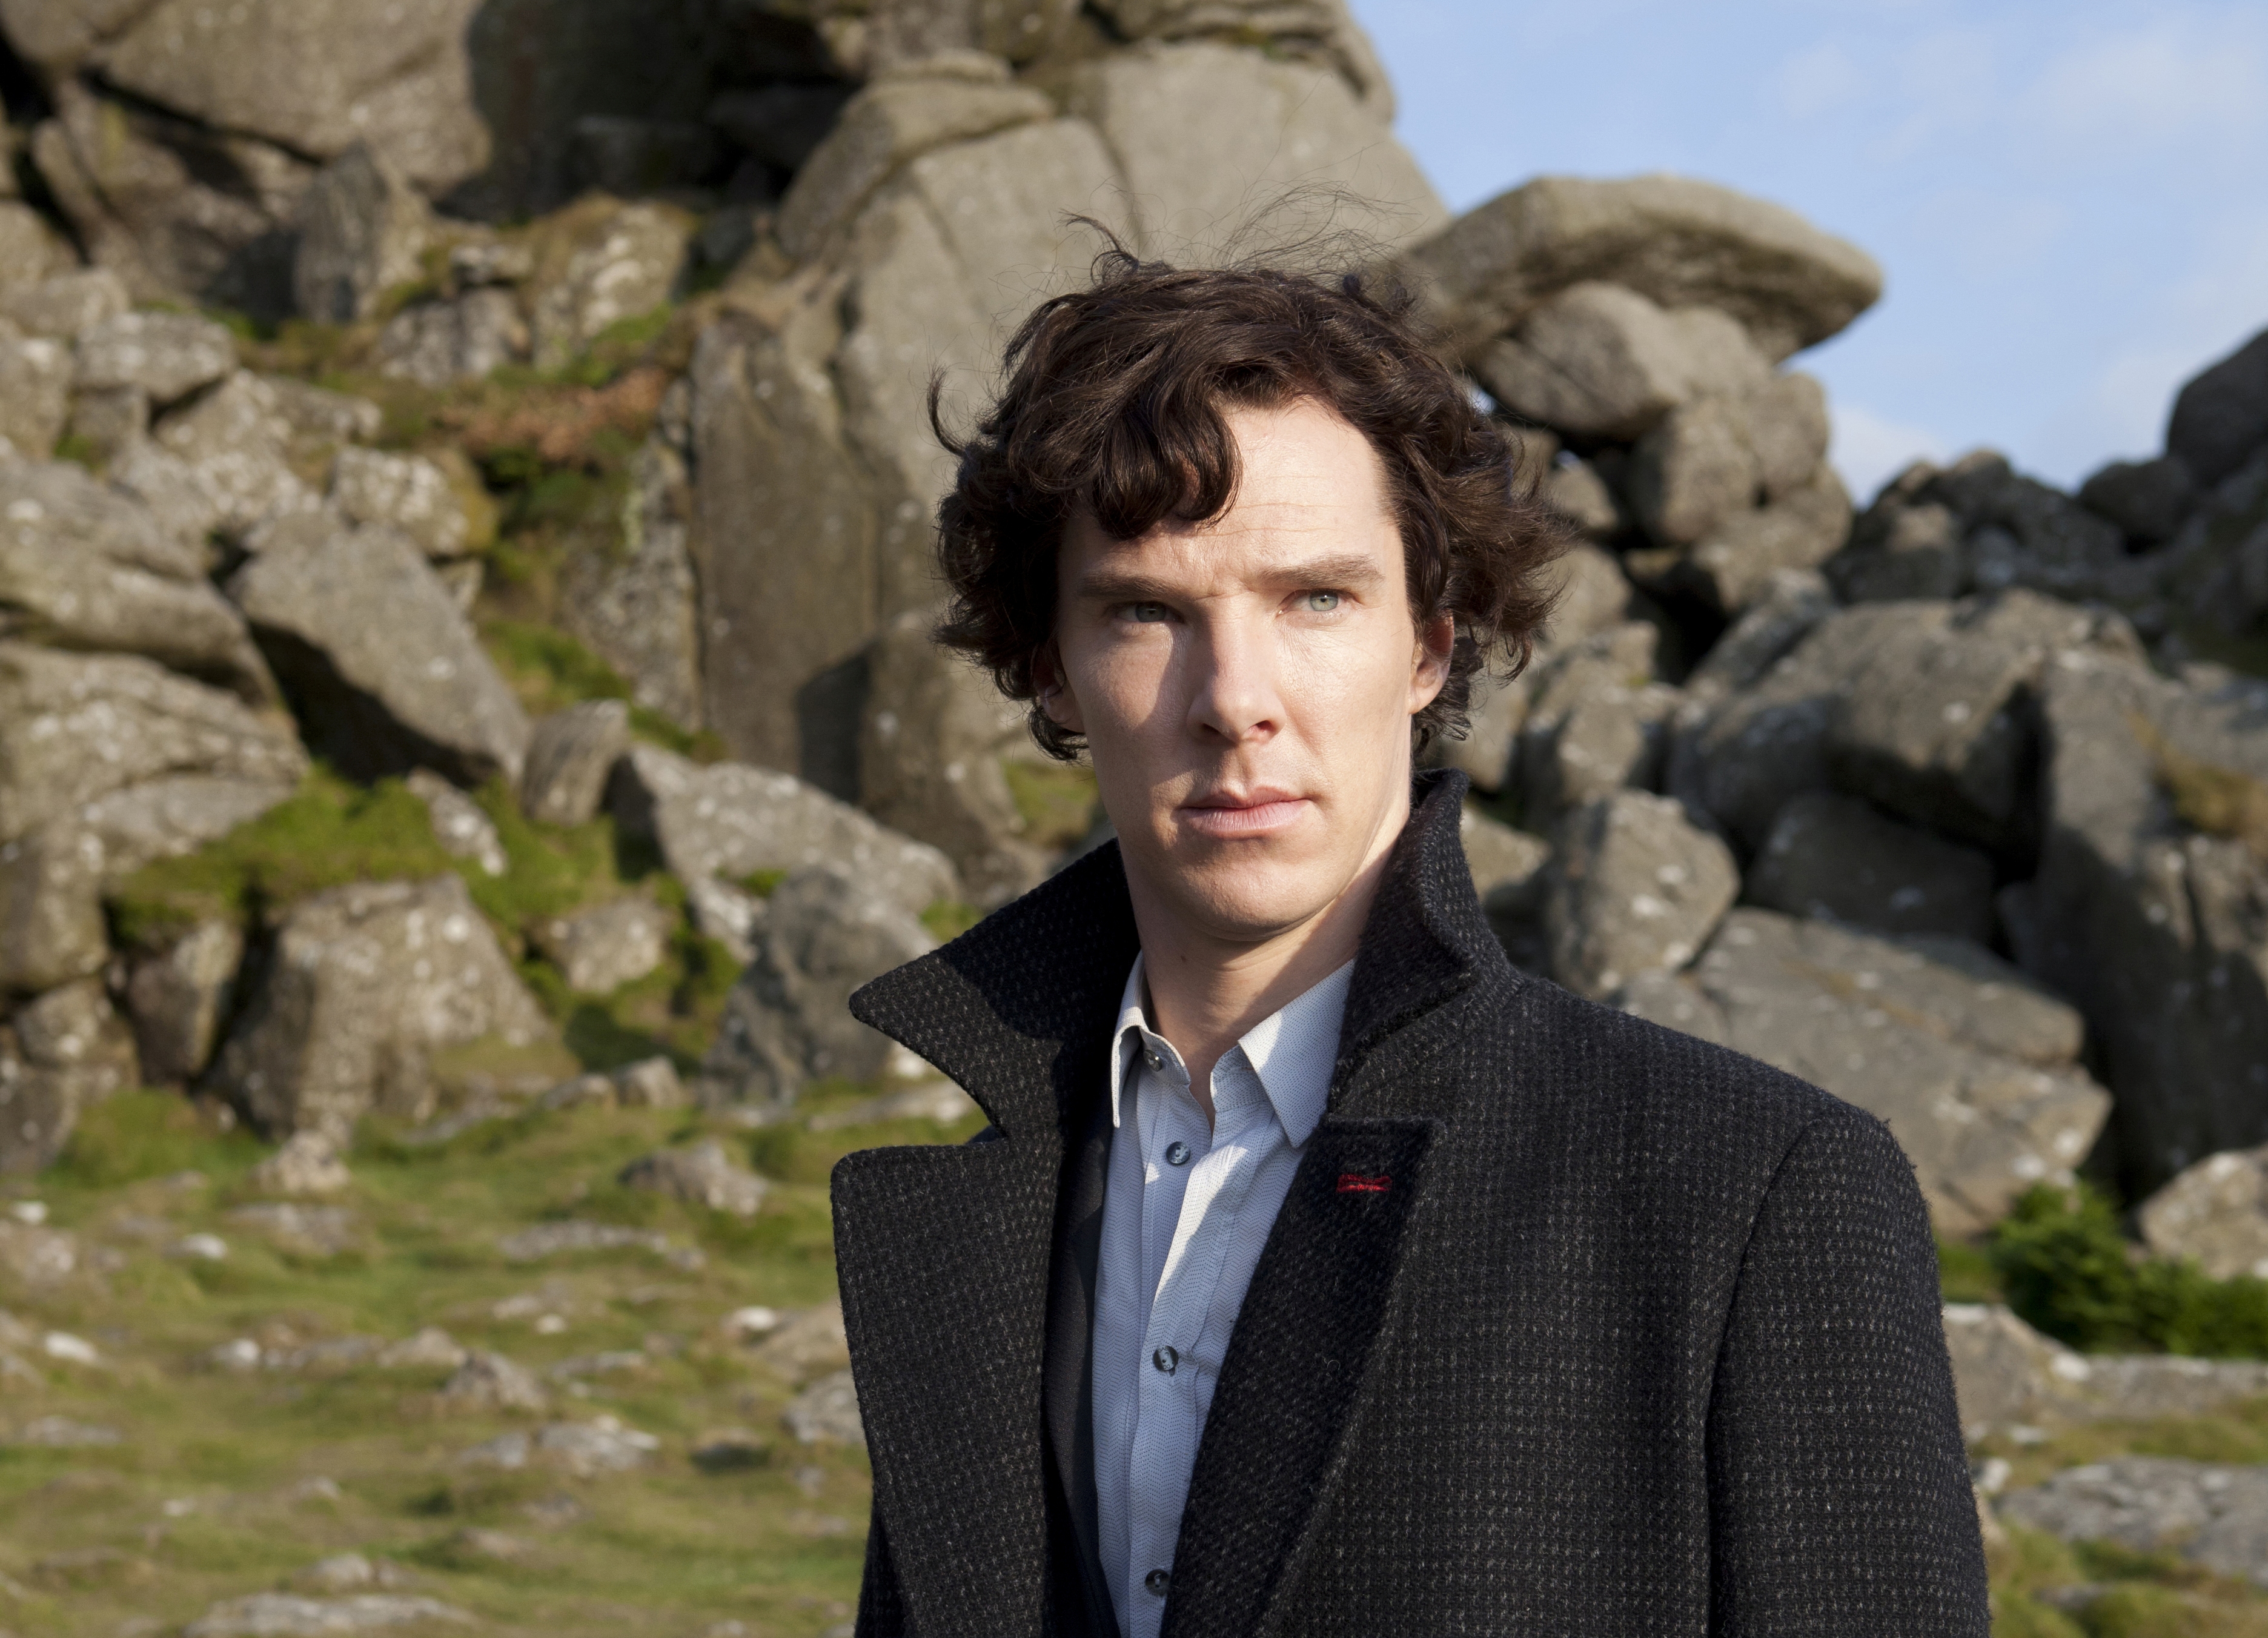 Benedict Cumberbatch as Sherlock Holmes. But we've all already seen that, right? (Photo: Hartswood Films for MASTERPIECE)